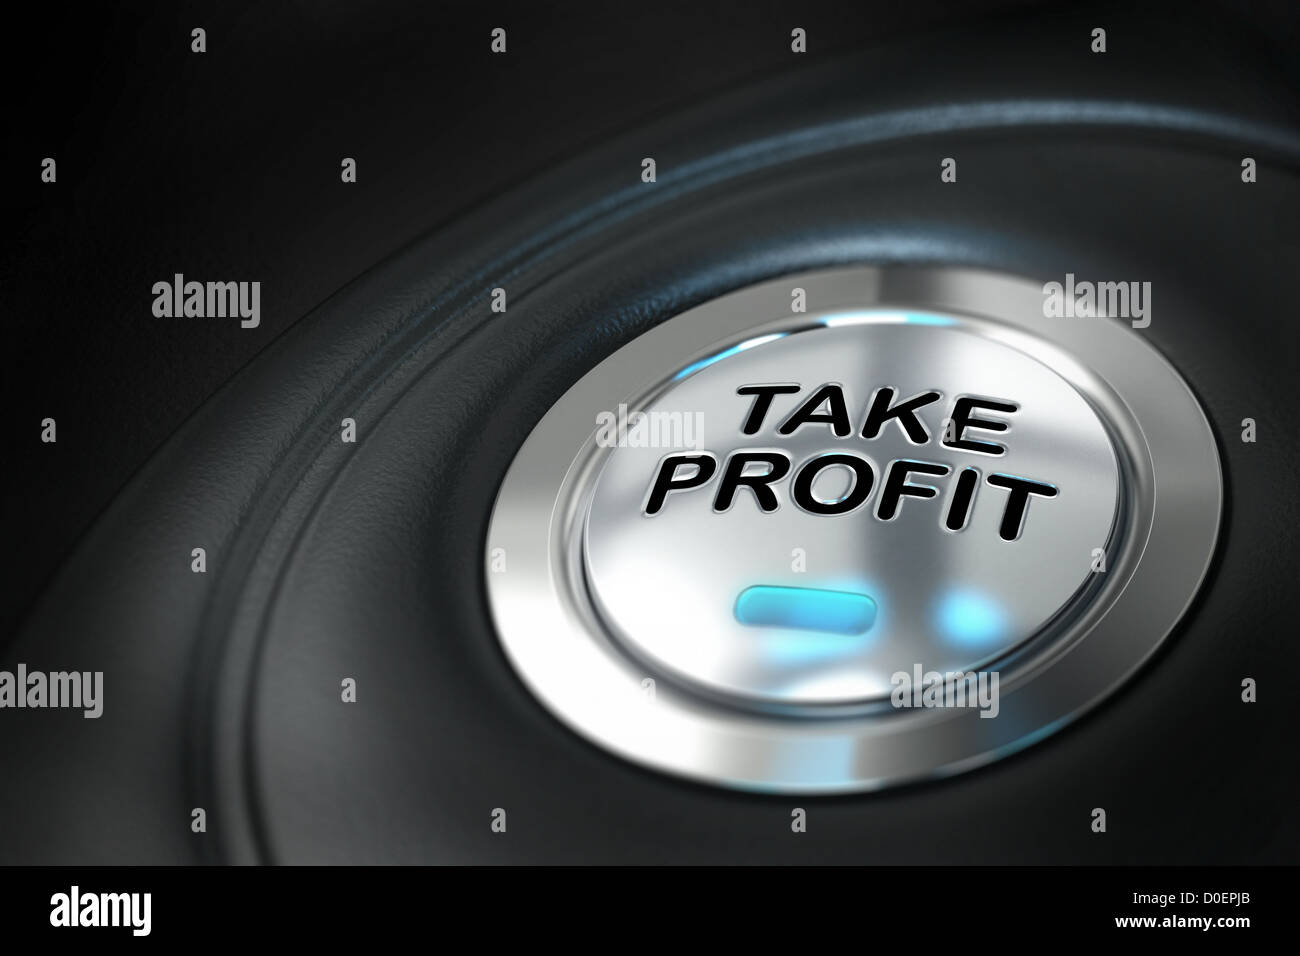 take profit button over black background with blur effect, market investment, conceptual image Stock Photo